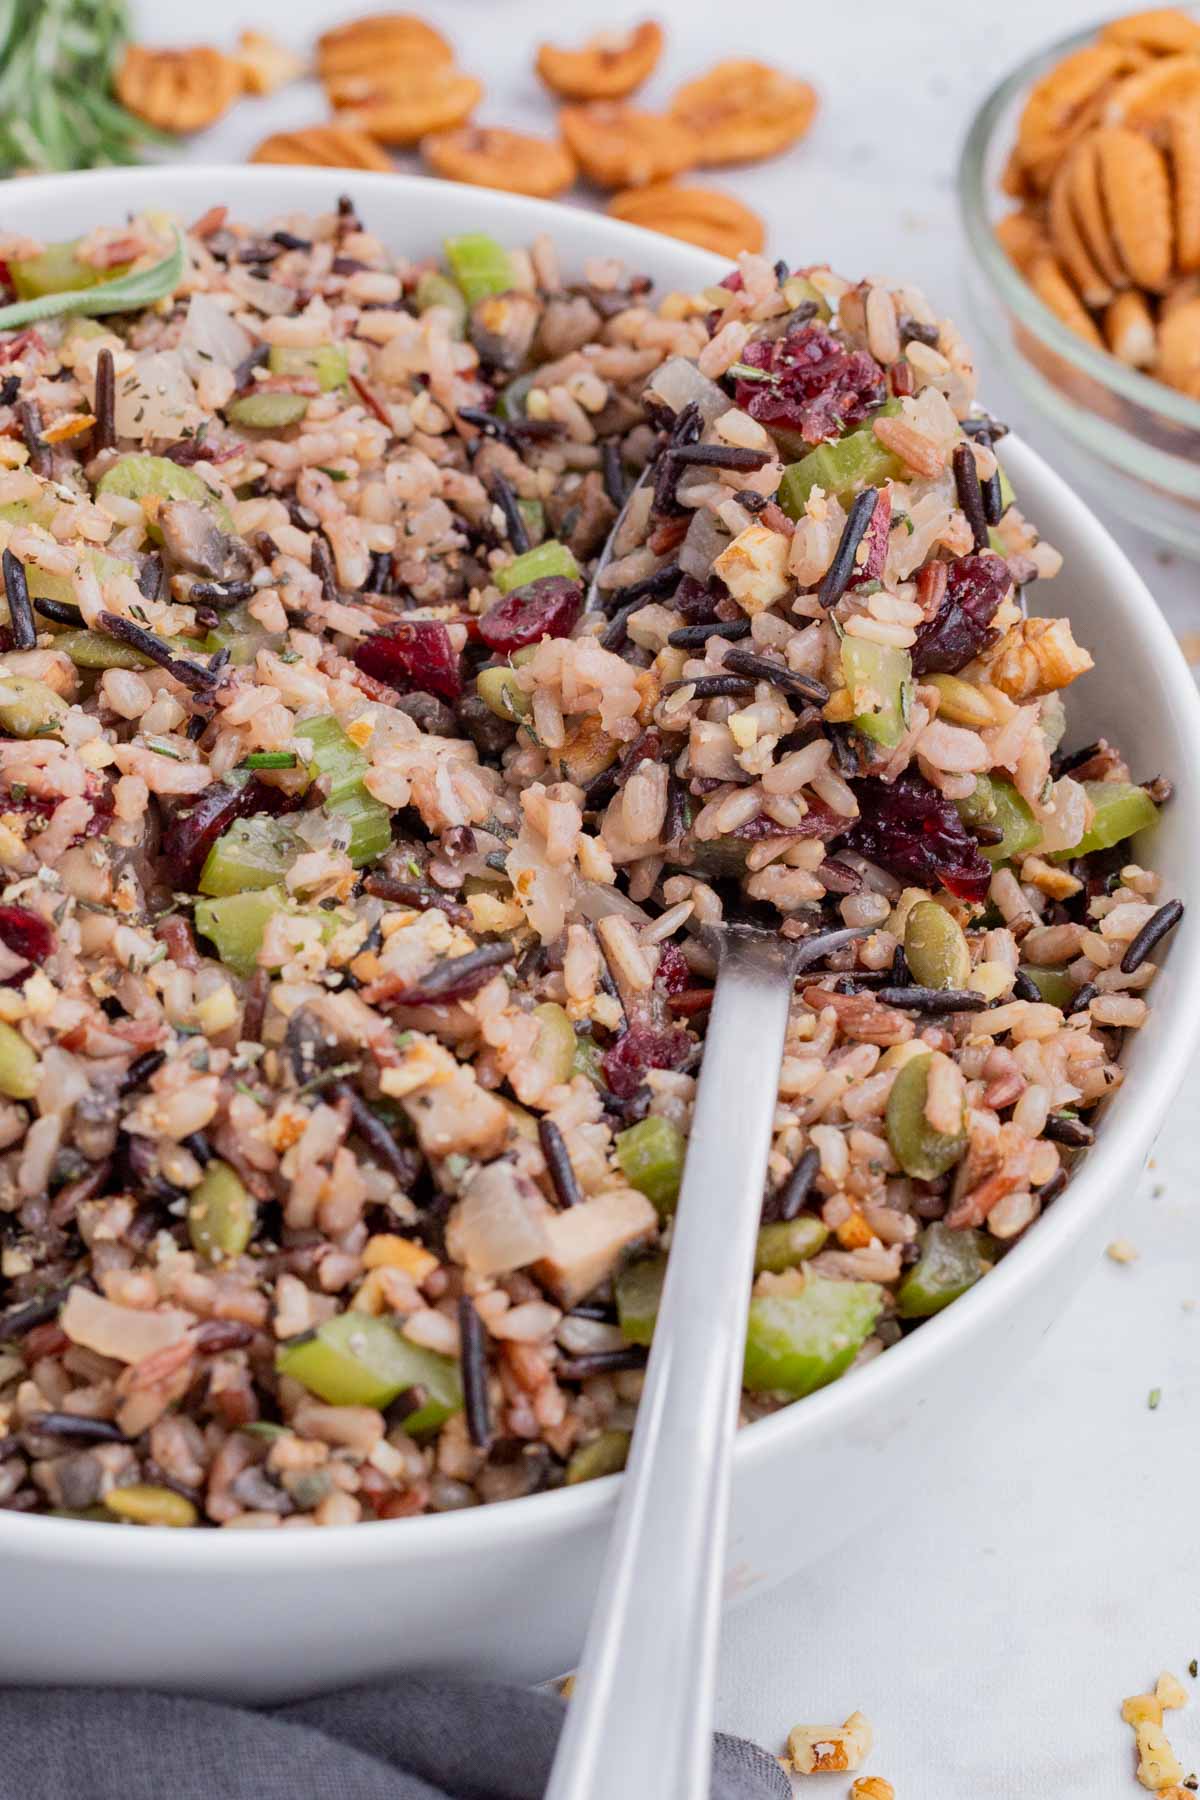 Wild rice stuffing with fresh herbs, cranberries, and nuts is a great side dish.